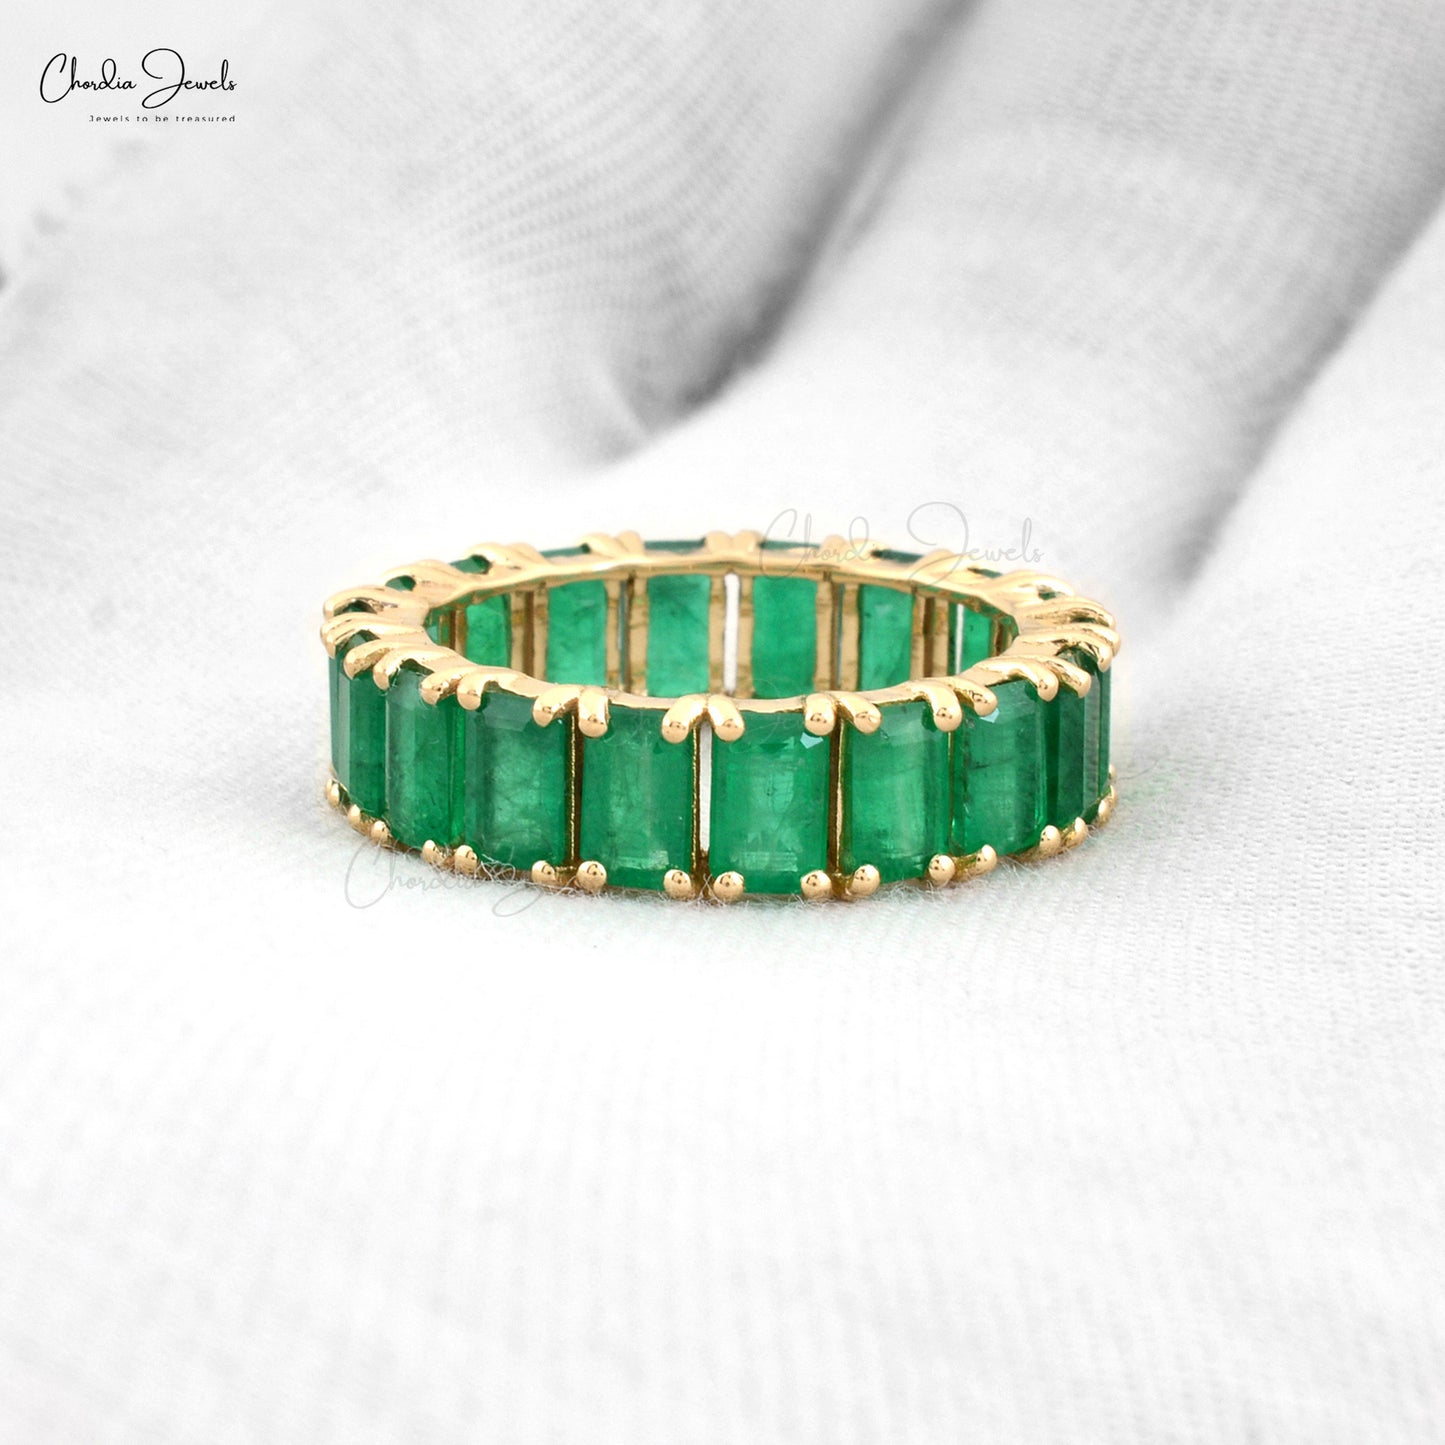 Make every moment memorable with this emerald minimalist ring.